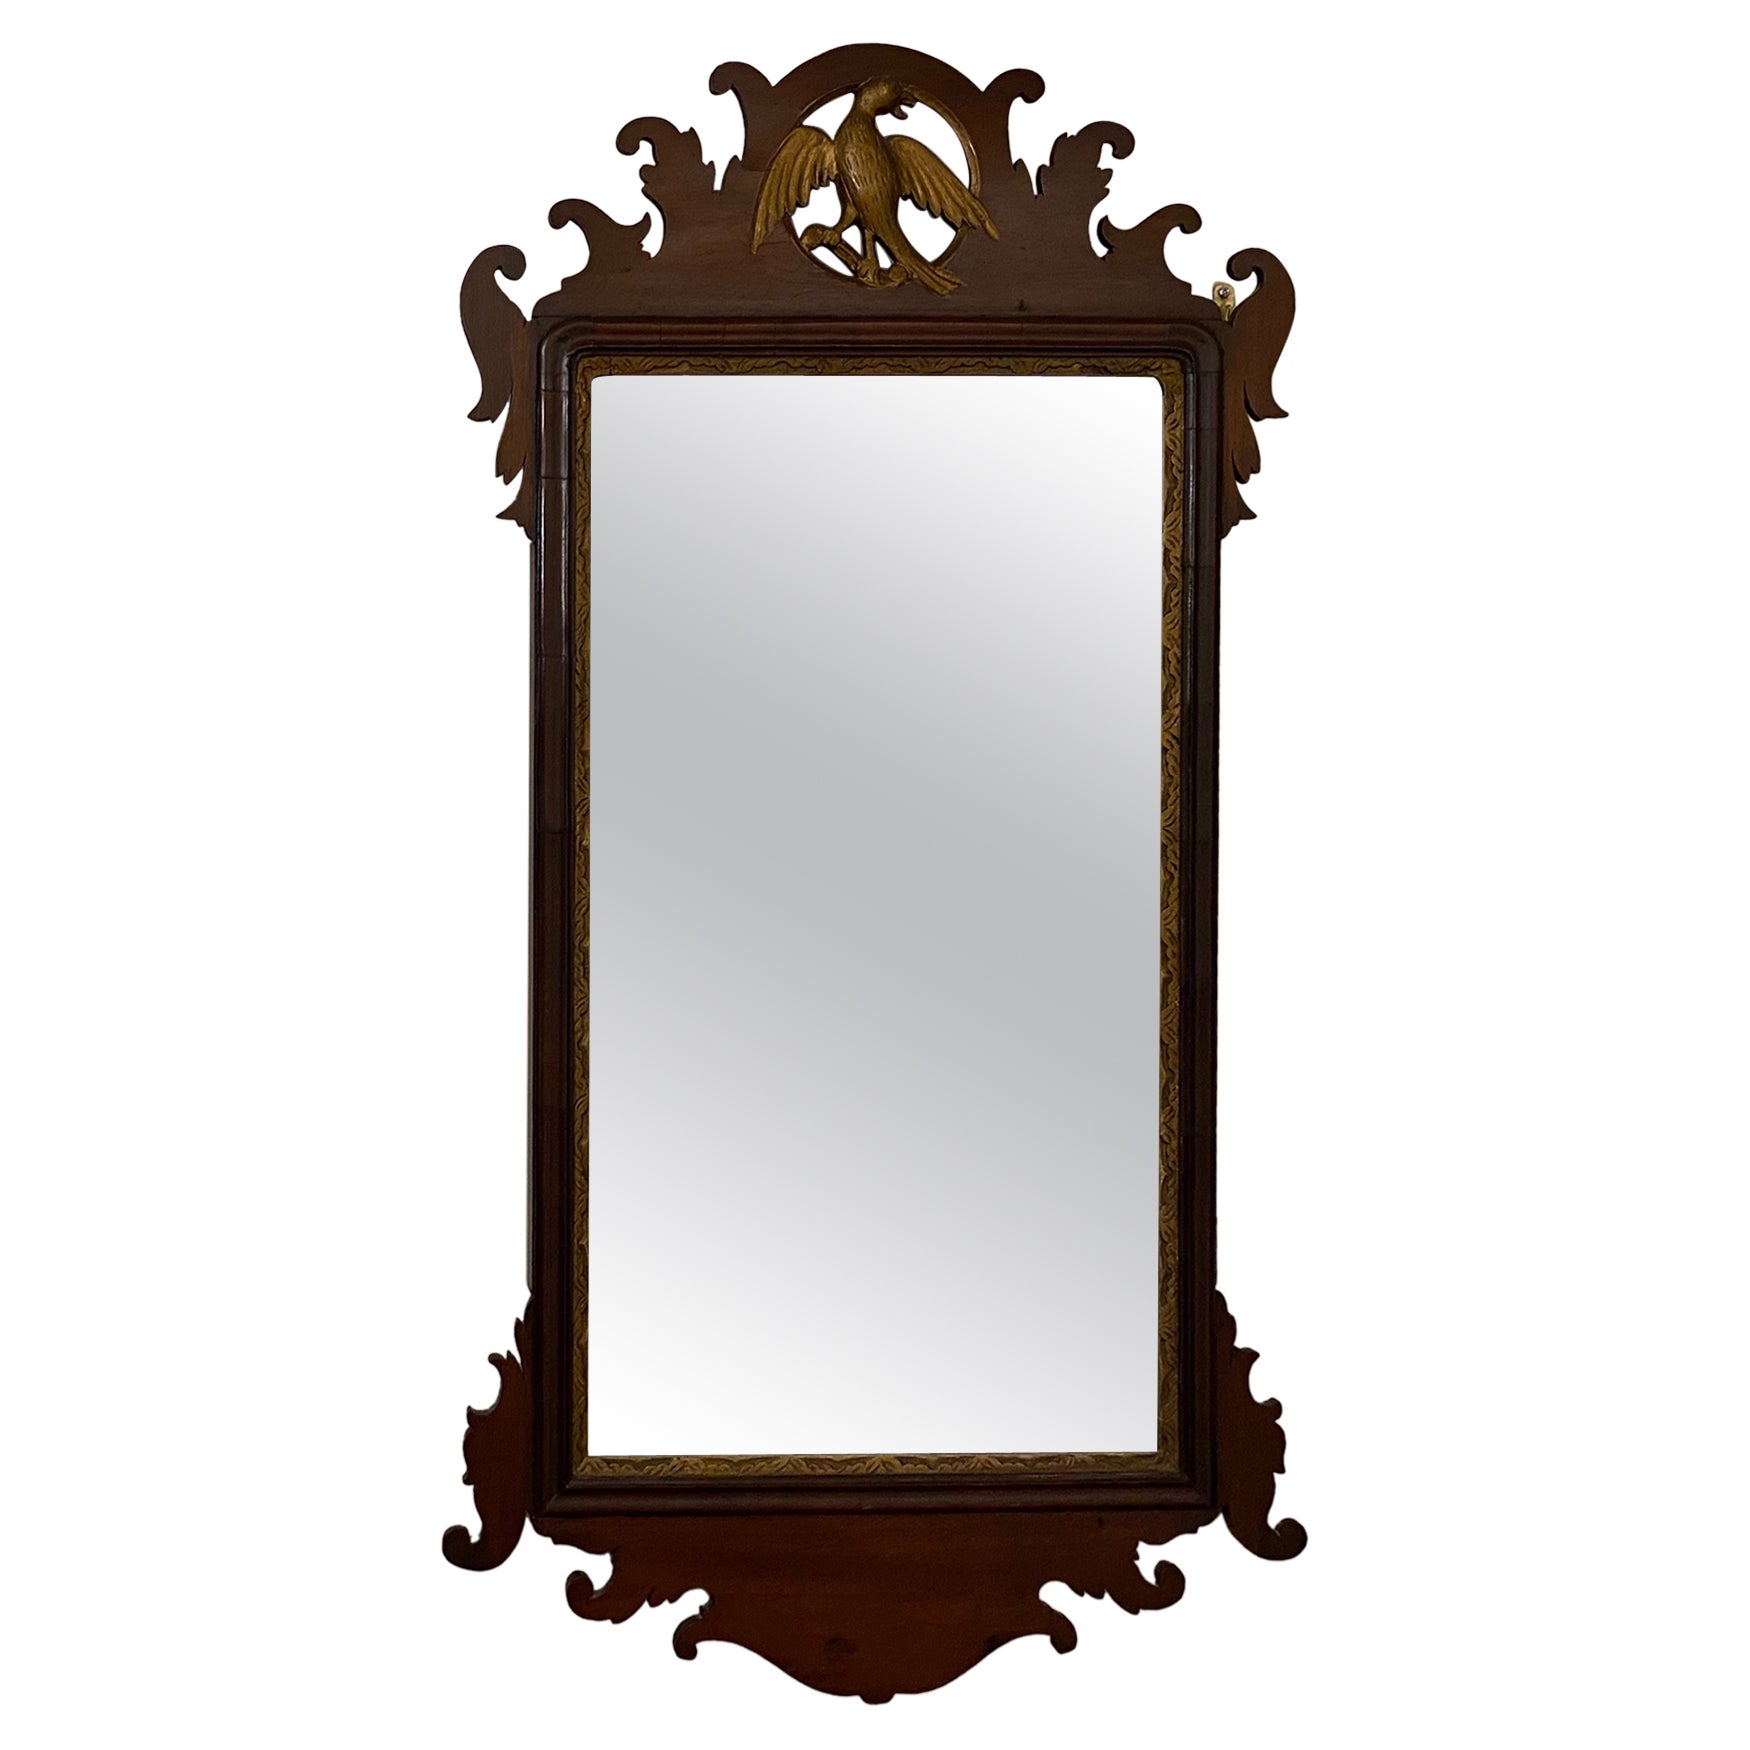 18th Century Early American Chippendale Style Wall Mirror with Eagle Pediment For Sale